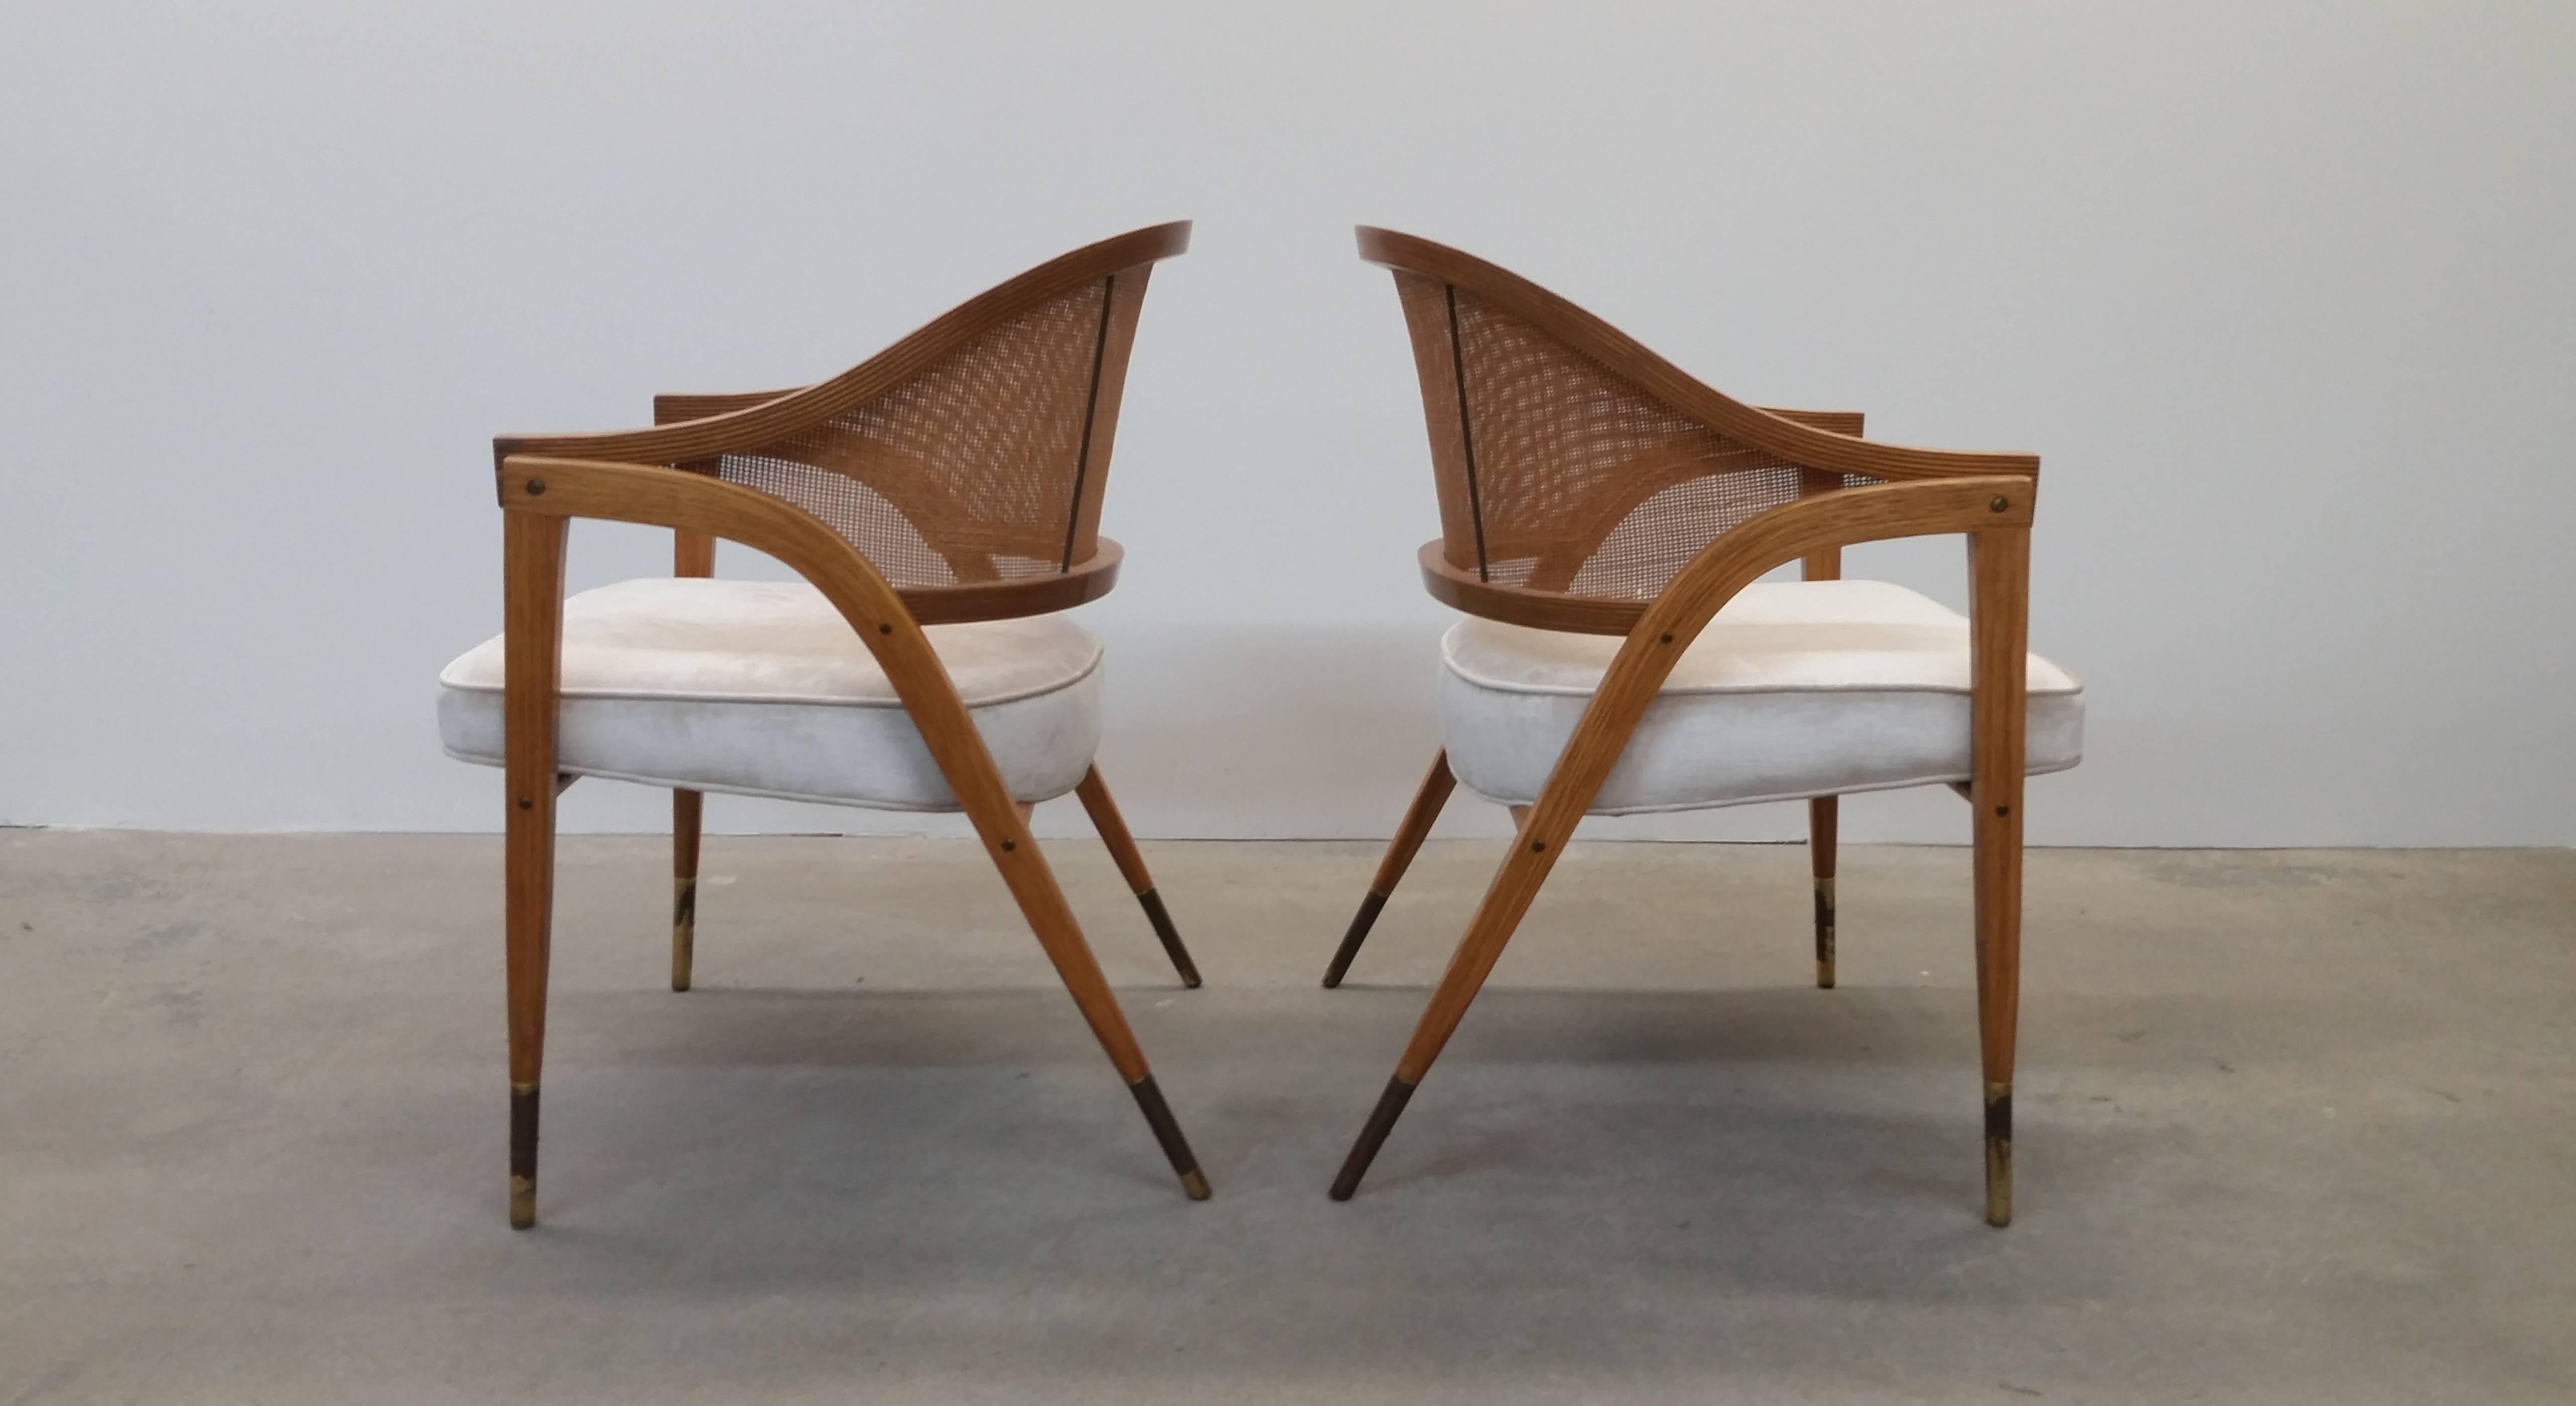 Pair of Dunbar model number 5480 chairs in ash and brass, circa 1962. Arguably one of Wormley's best designs. Newly upholstered in an off white cut velvet. New foam was installed during re-upholstery process. Brass sabots show patina/tarnish, but we